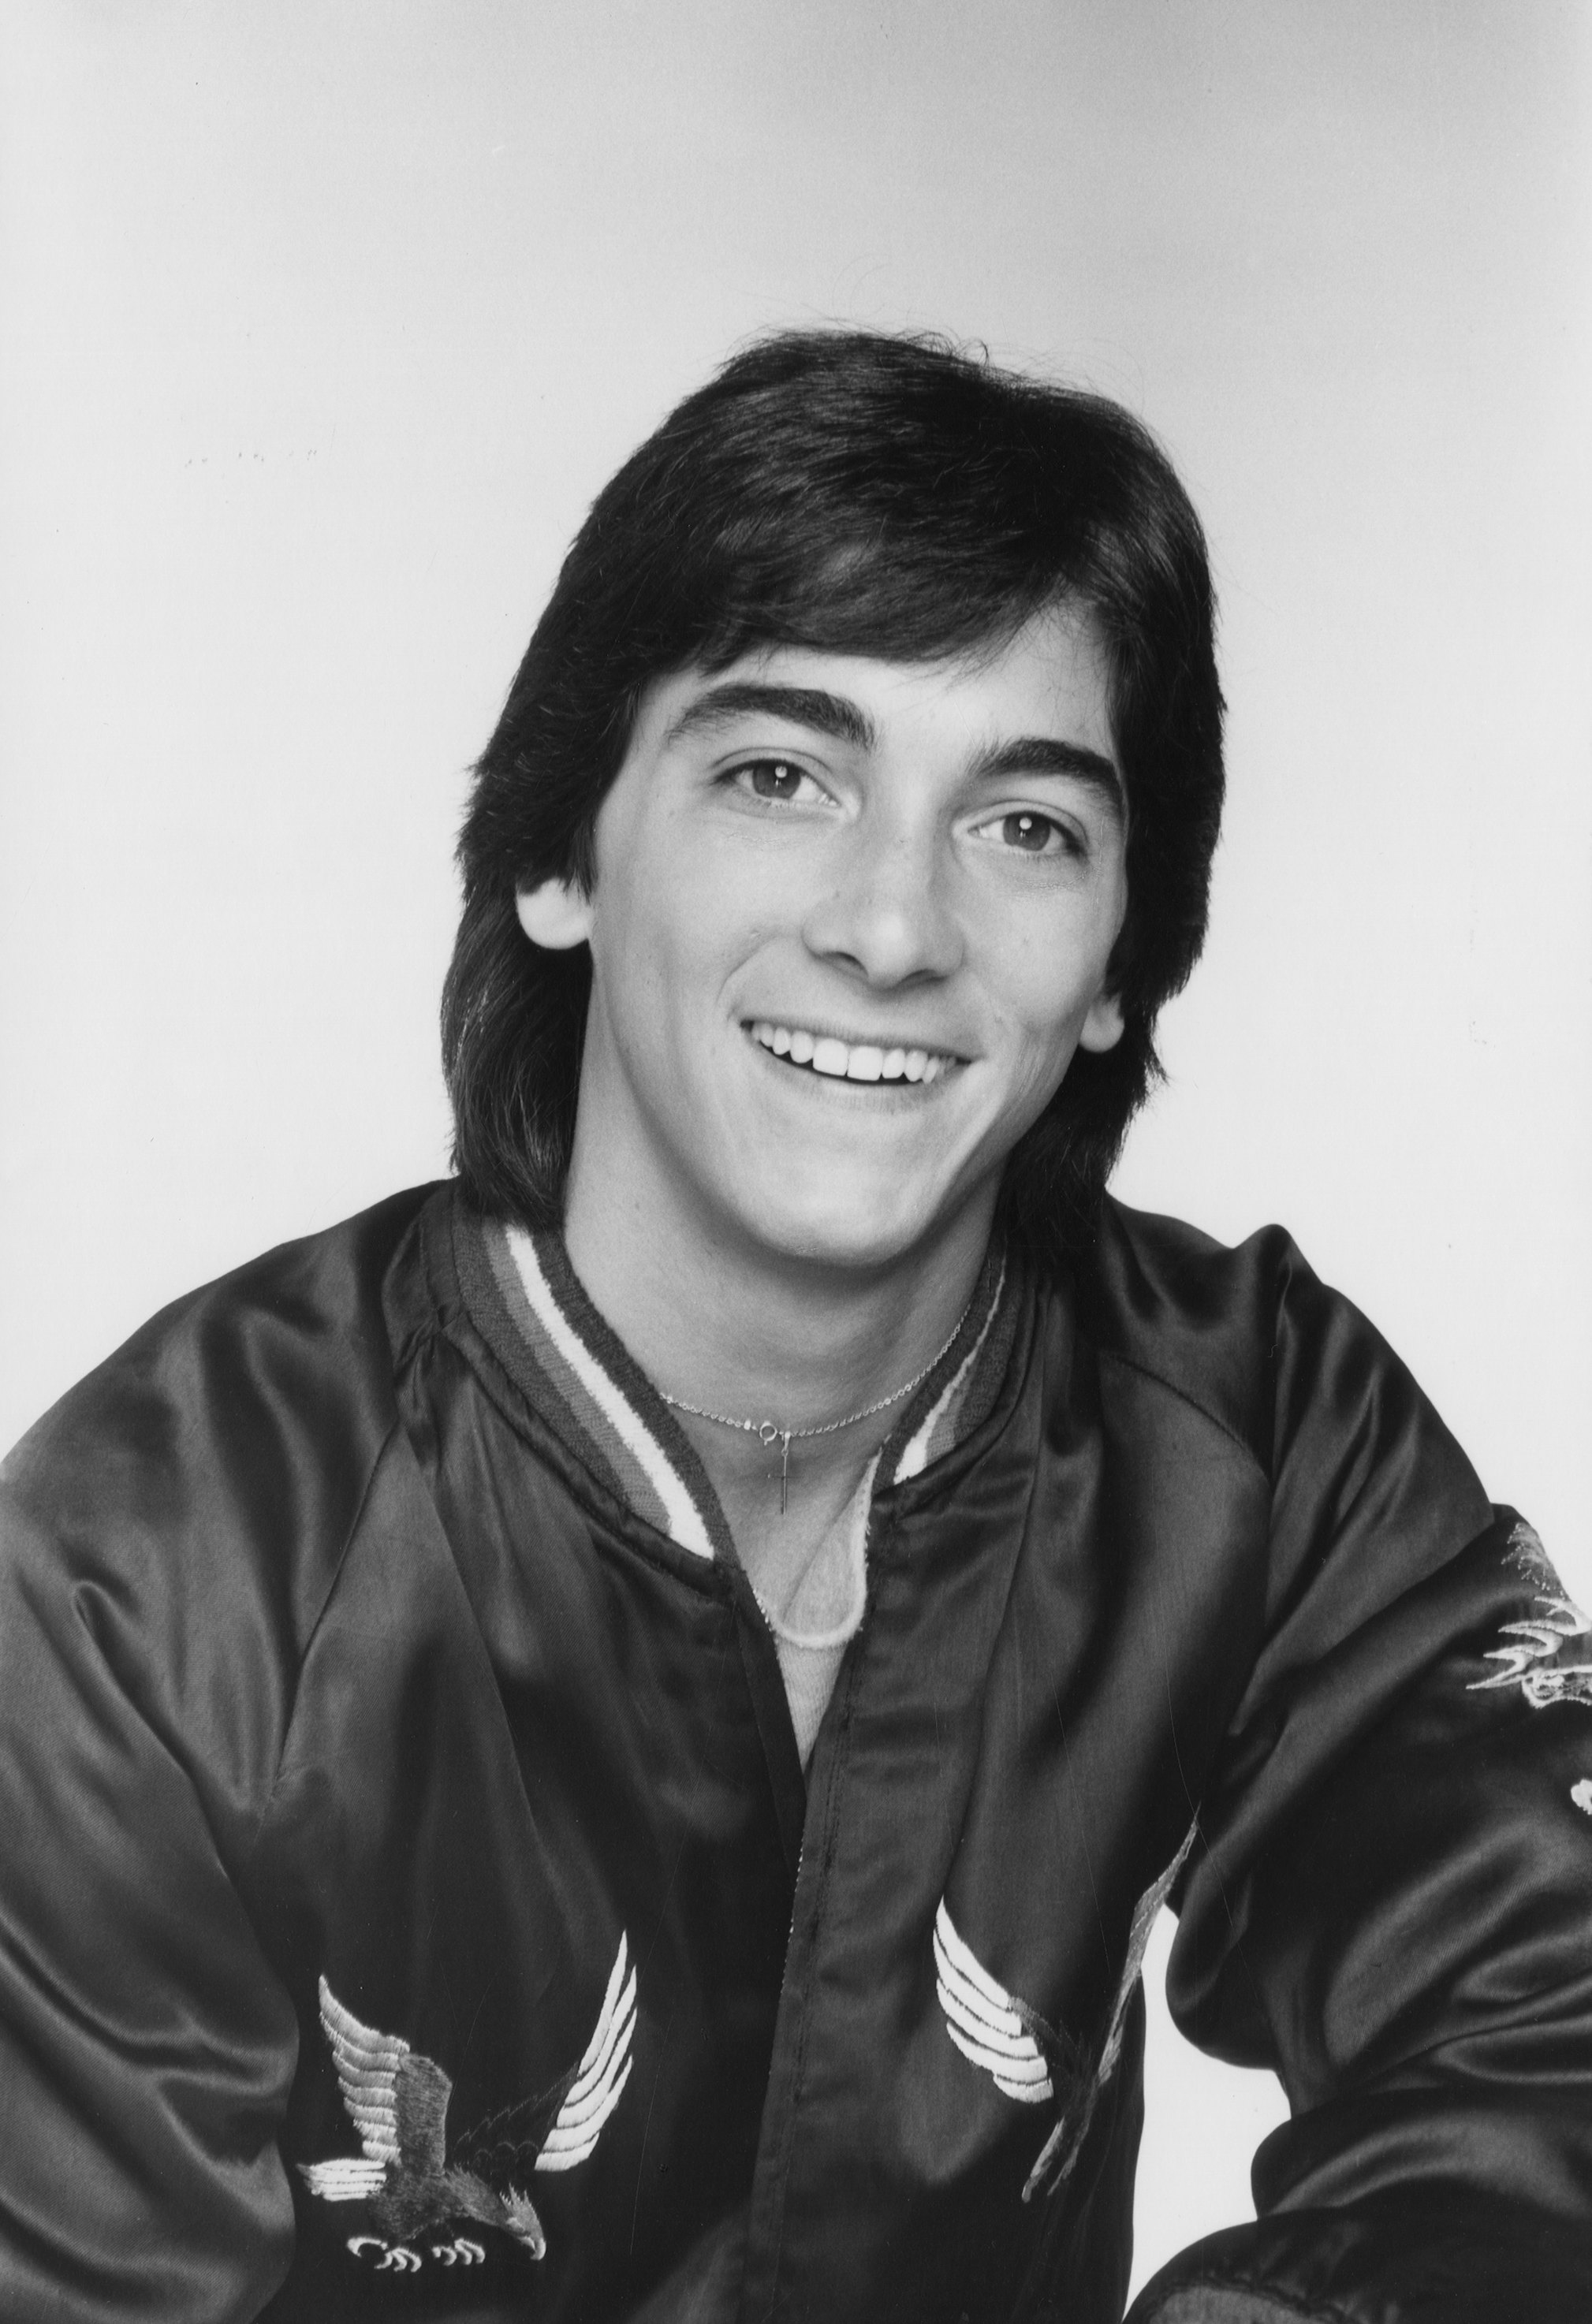 Scott Baio on "Happy Days" in 1983 | Source: Getty Images